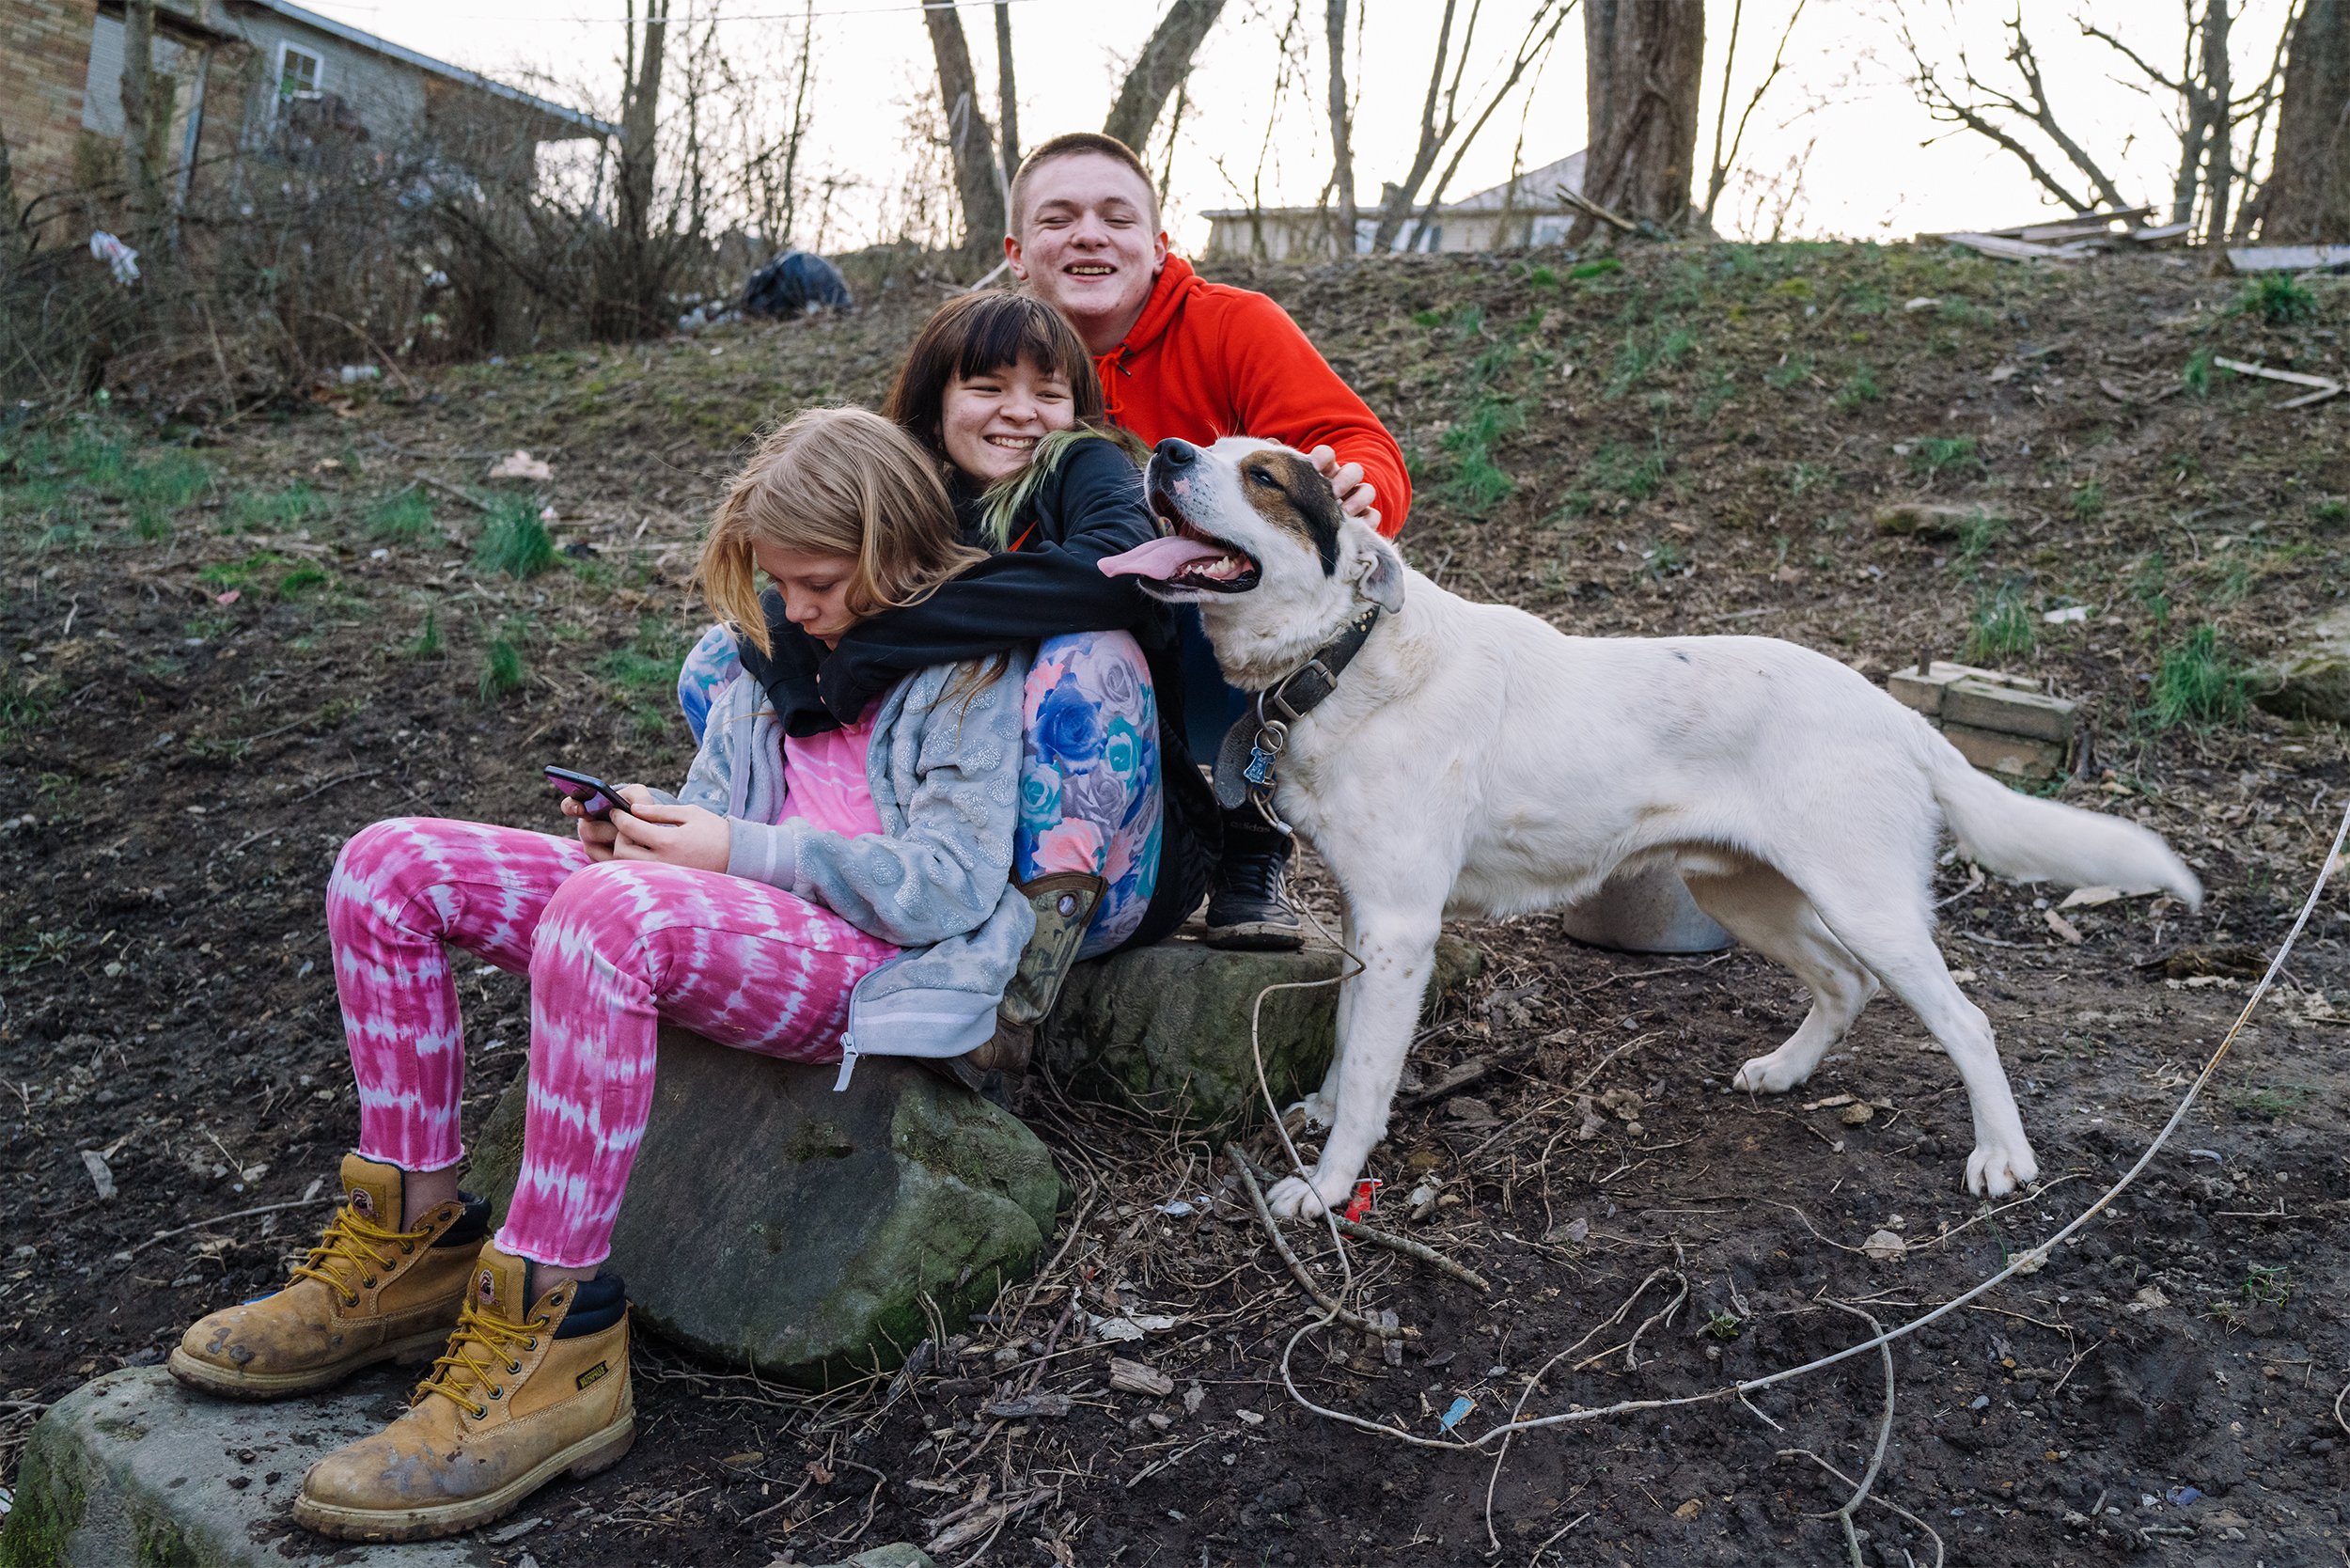  Reuben sits together with his sister Debra (middle), his cousin Carlee (bottom) and his dog Patches on the hill behind Ben's house on March 13, 2021. Having his family torn apart during foster care, Rueben never wants to experience that separation a